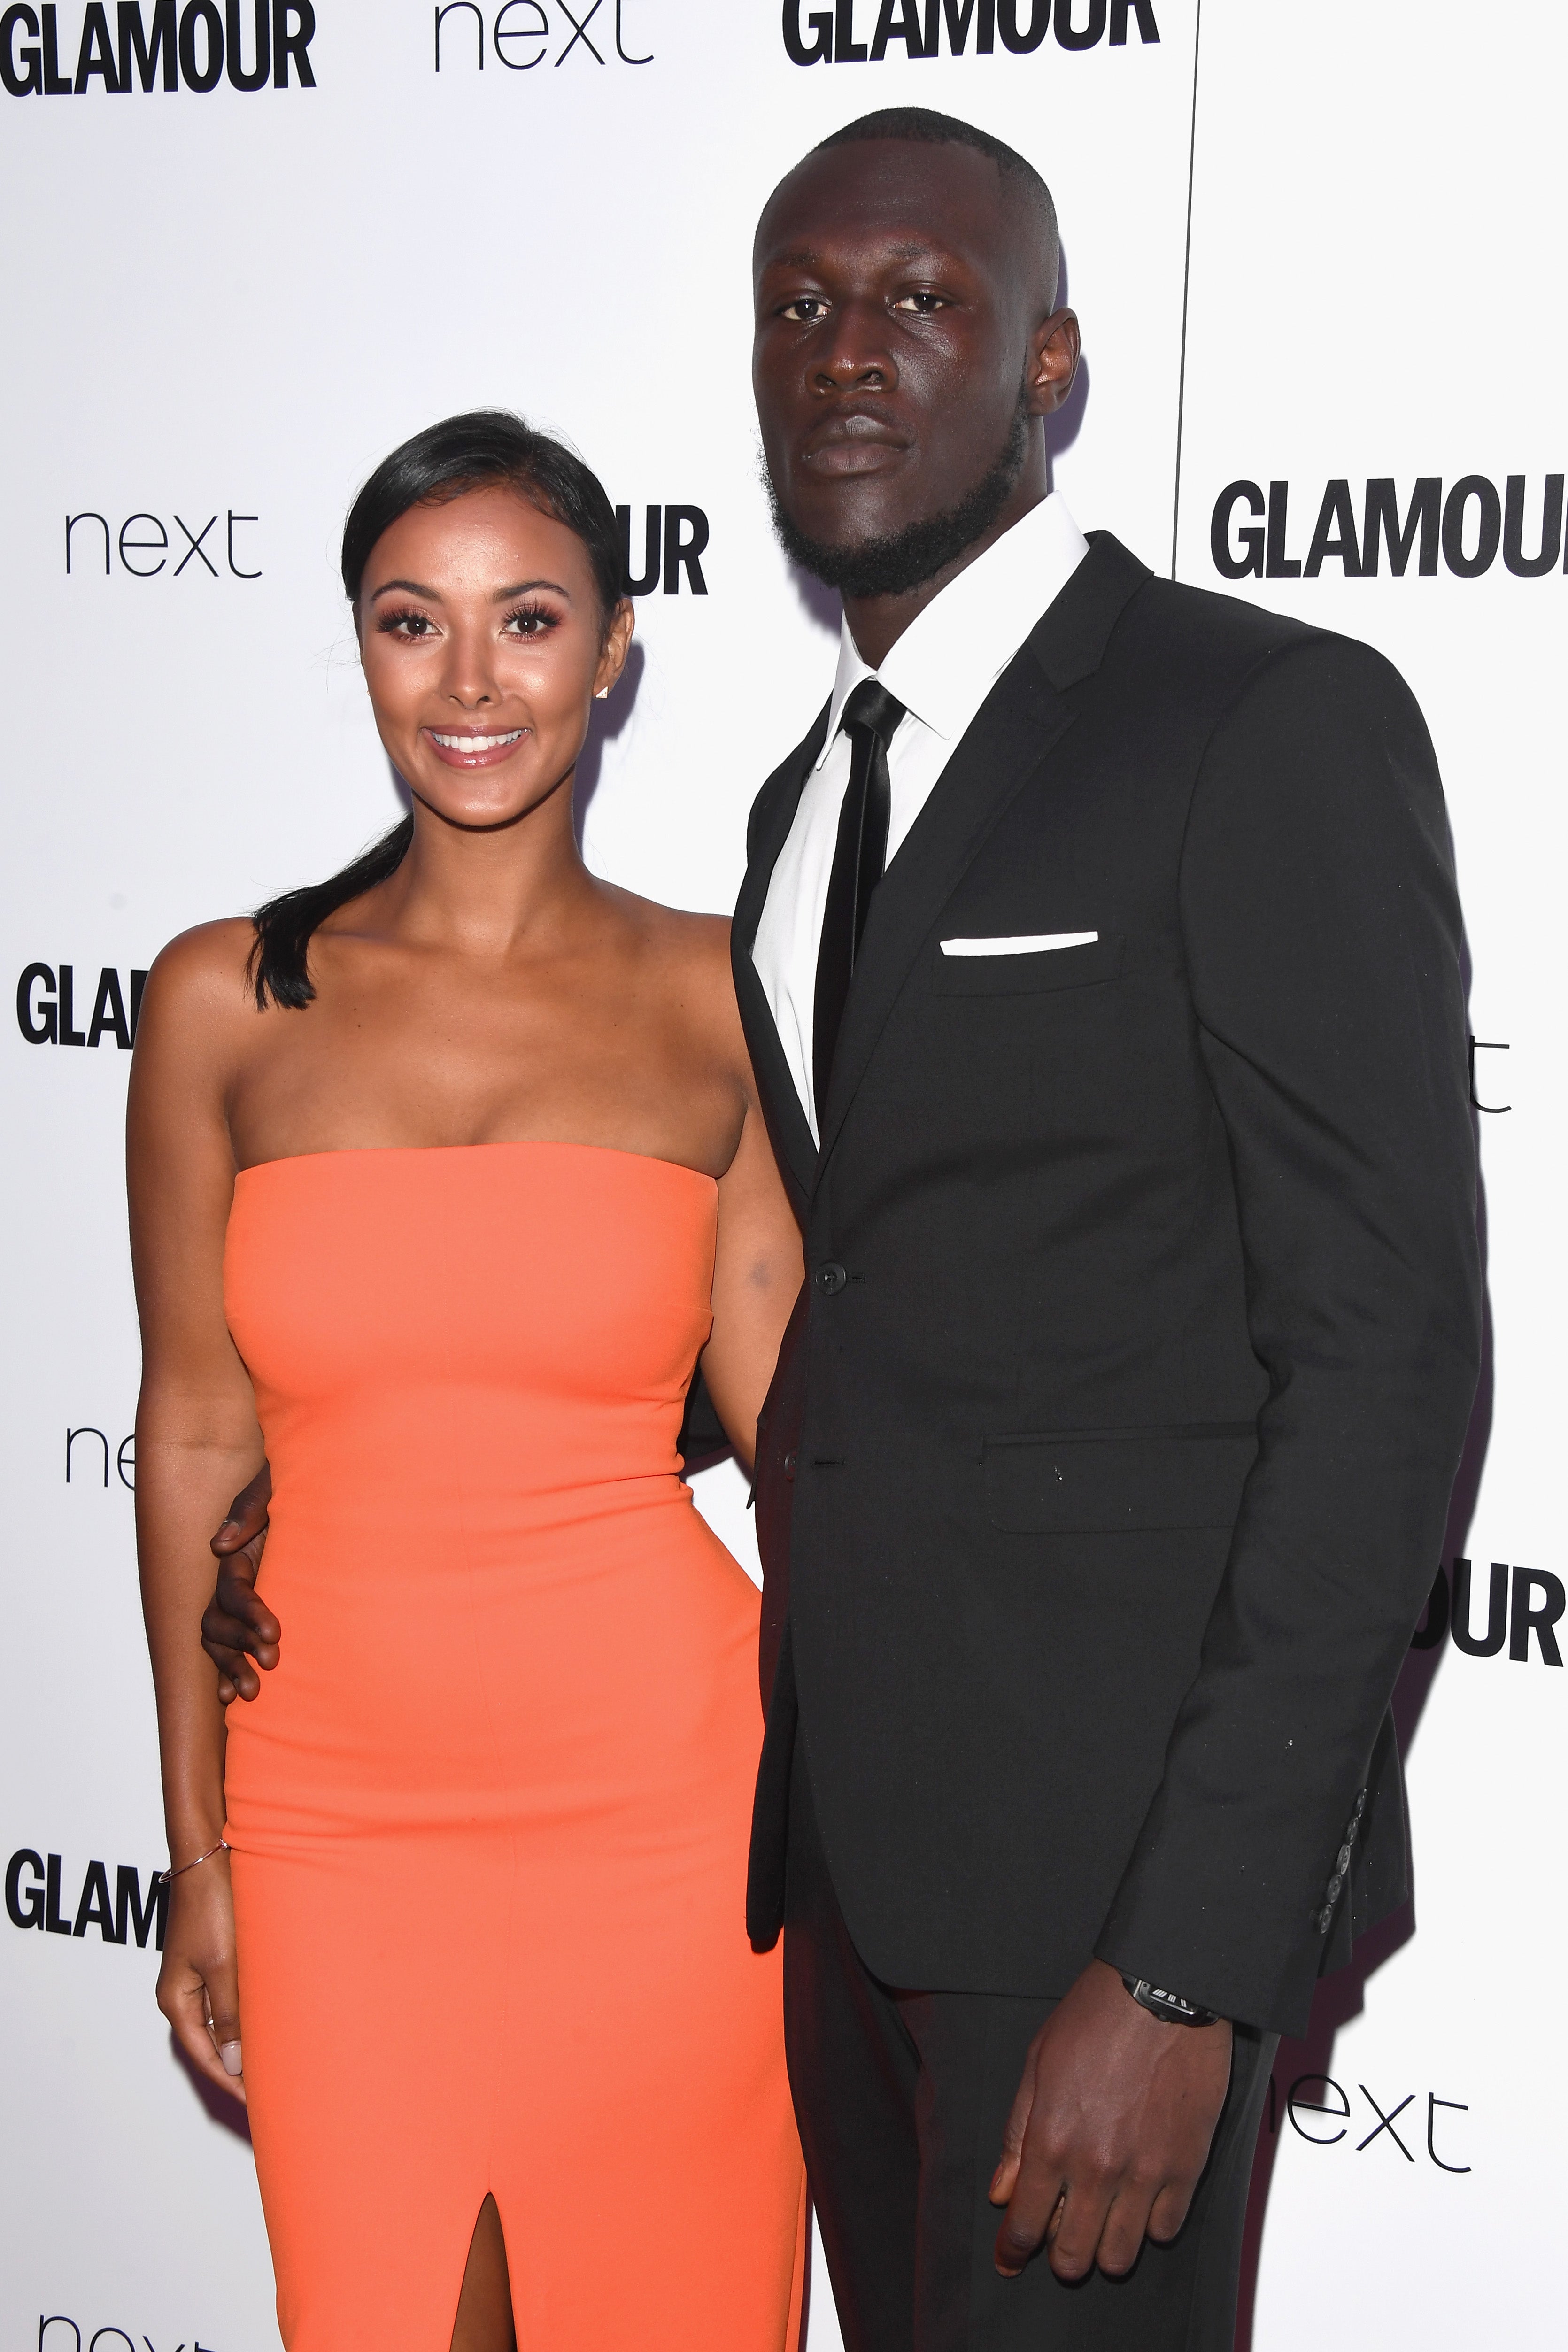 Maya Jama and Stormzy attend the Glamour Women of The Year awards 2017 at Berkeley Square Gardens on June 6, 2017